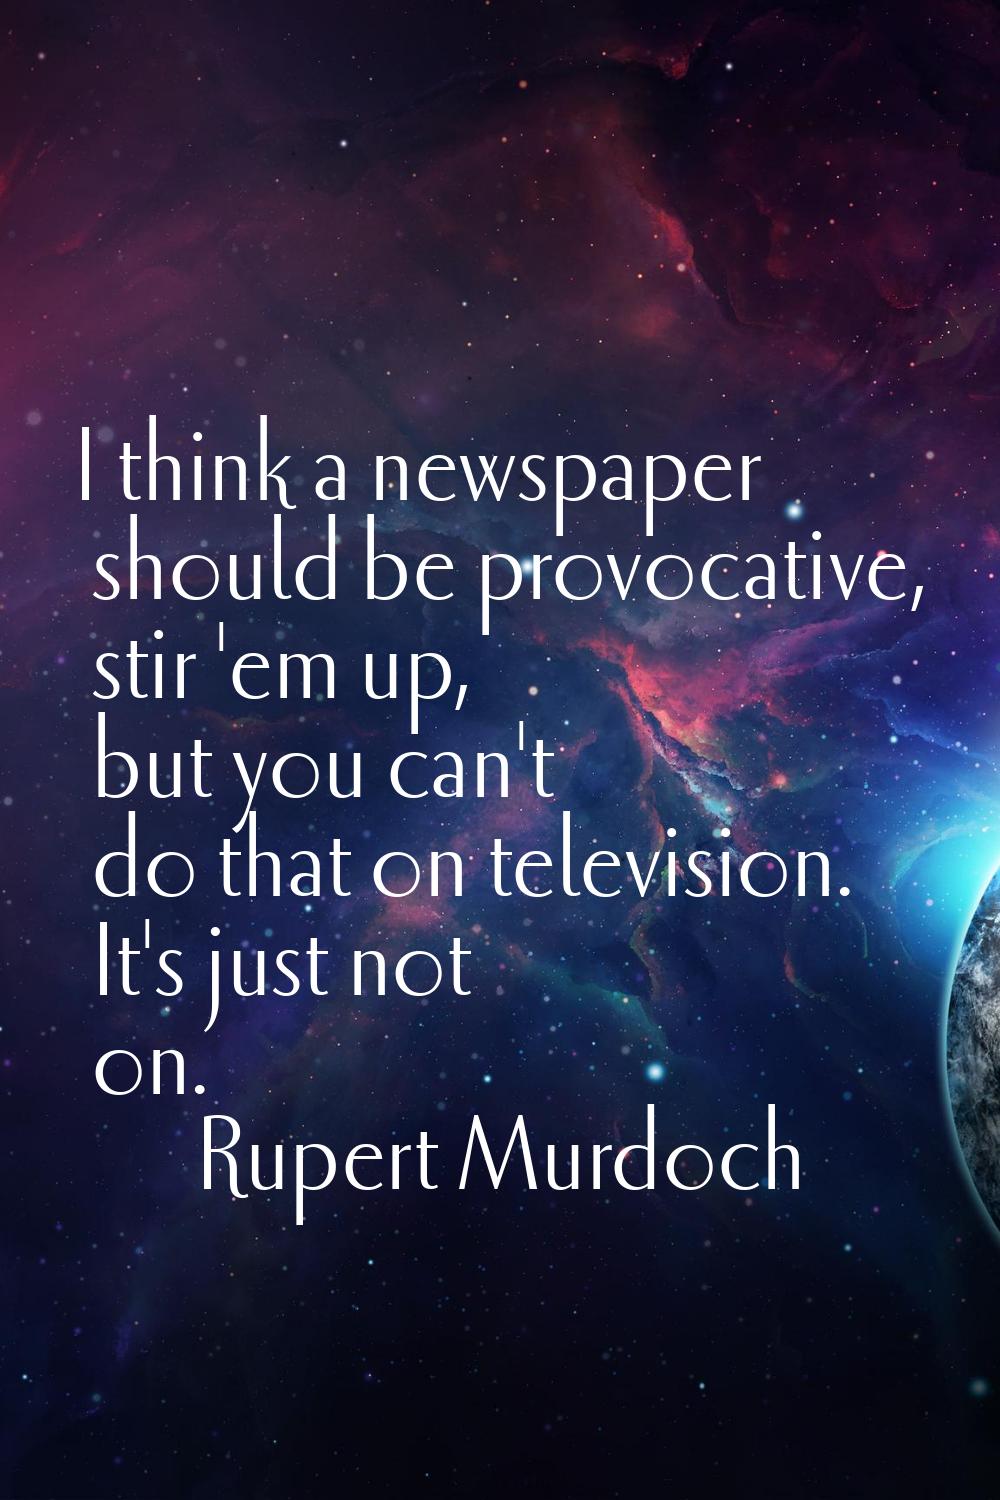 I think a newspaper should be provocative, stir 'em up, but you can't do that on television. It's j